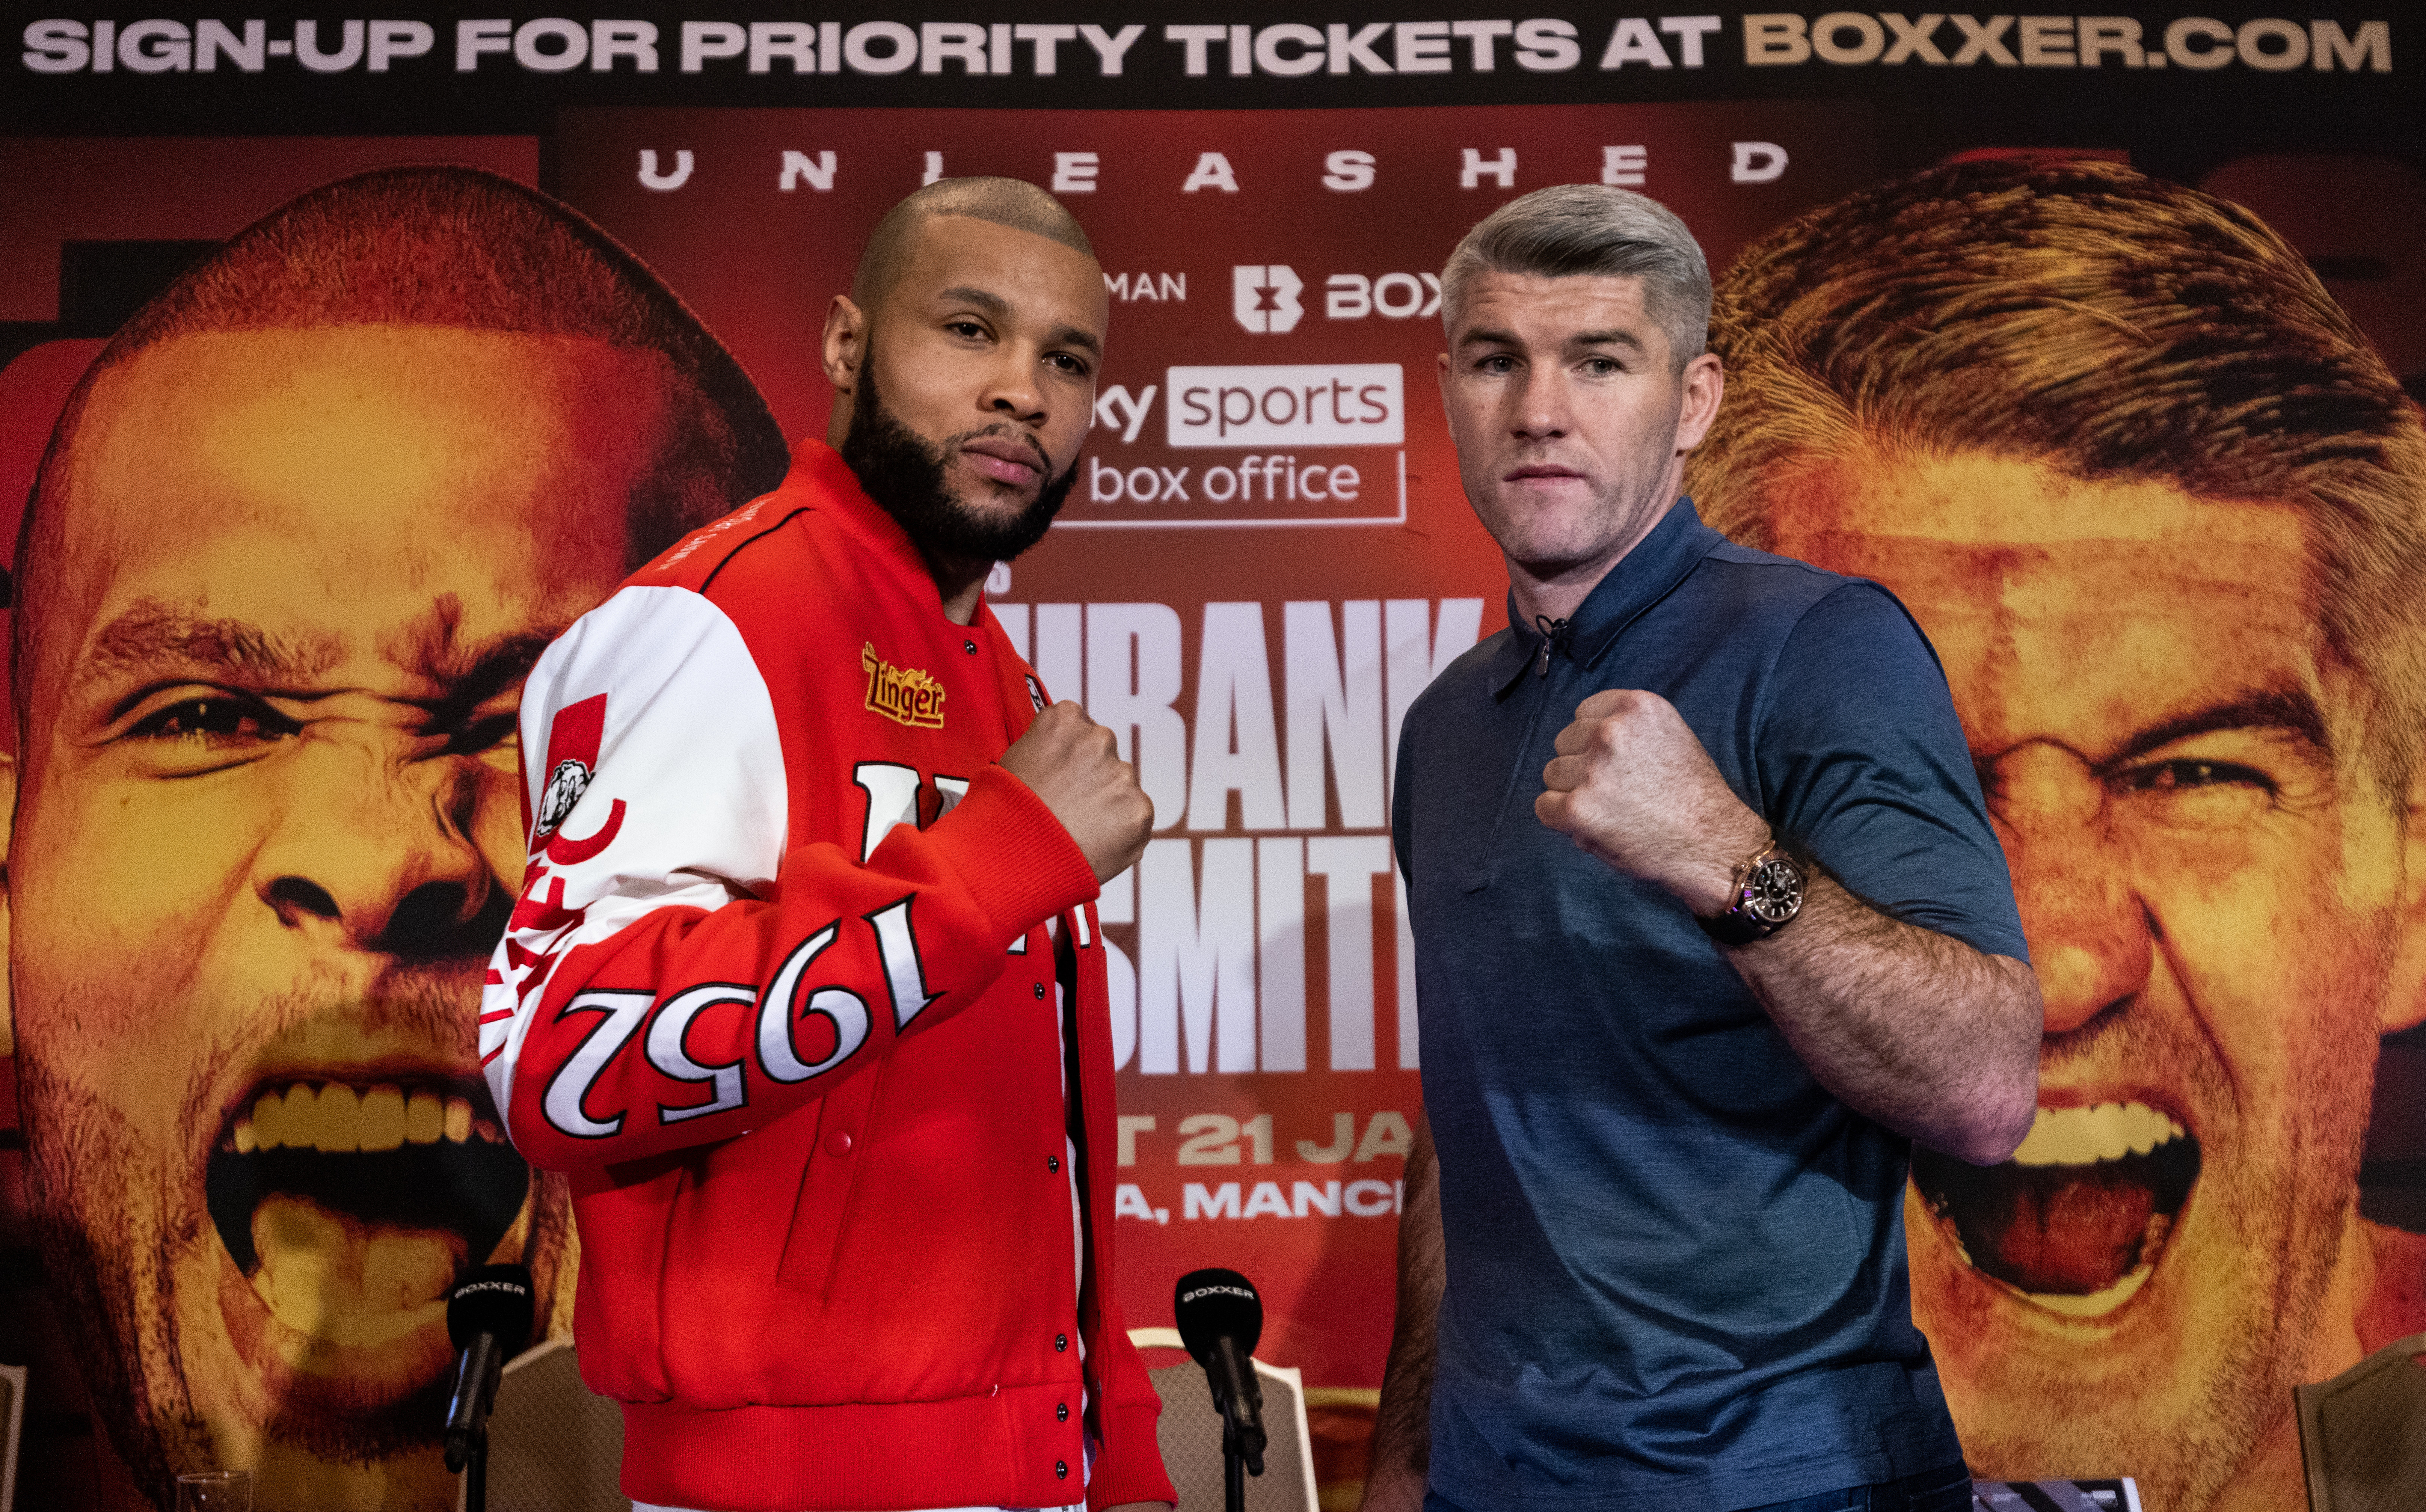 Chris Eubank Jr and Liam Smith headline the coming week in boxing